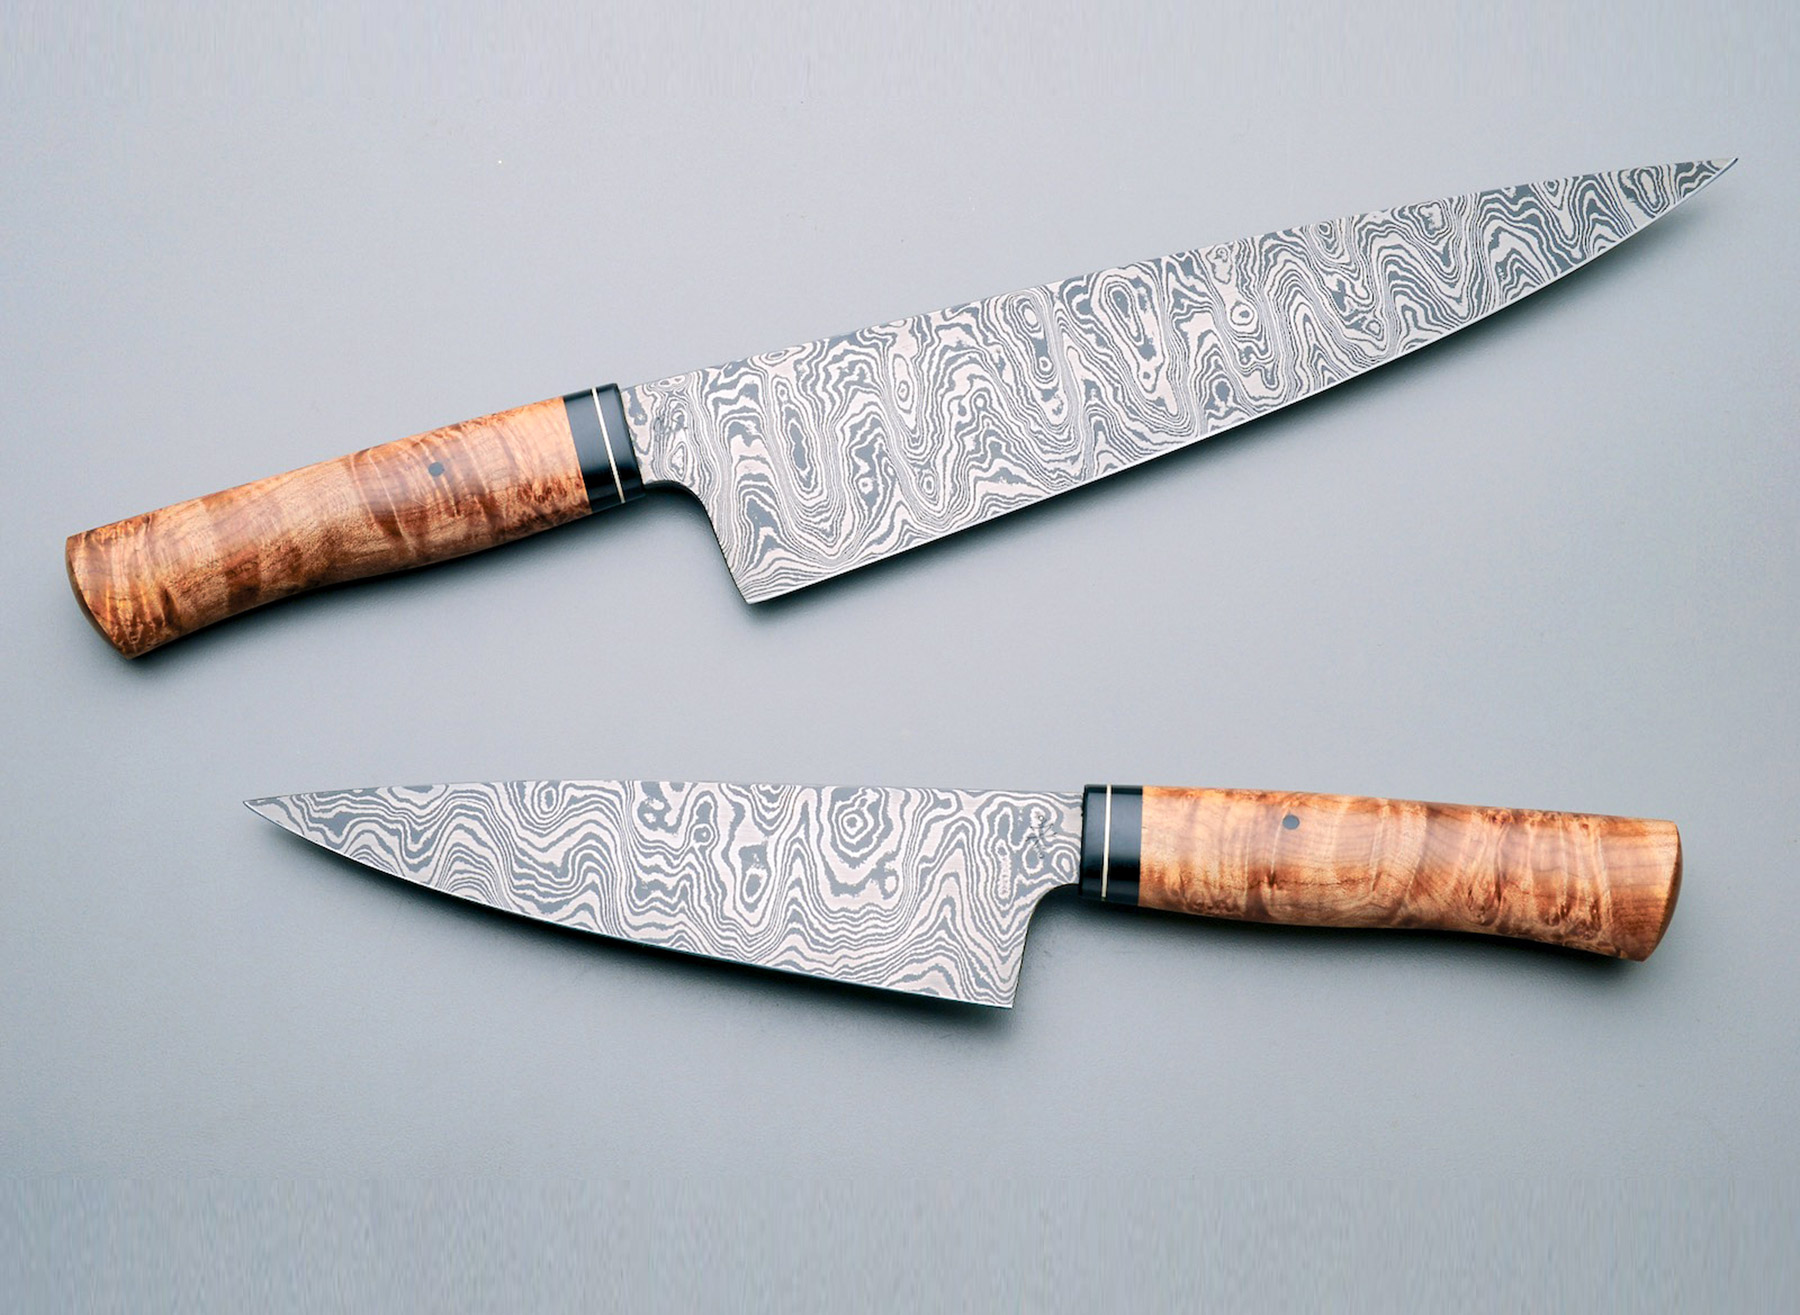 Was gifted this hand crafted chefs knife. 14” Damascus steel with